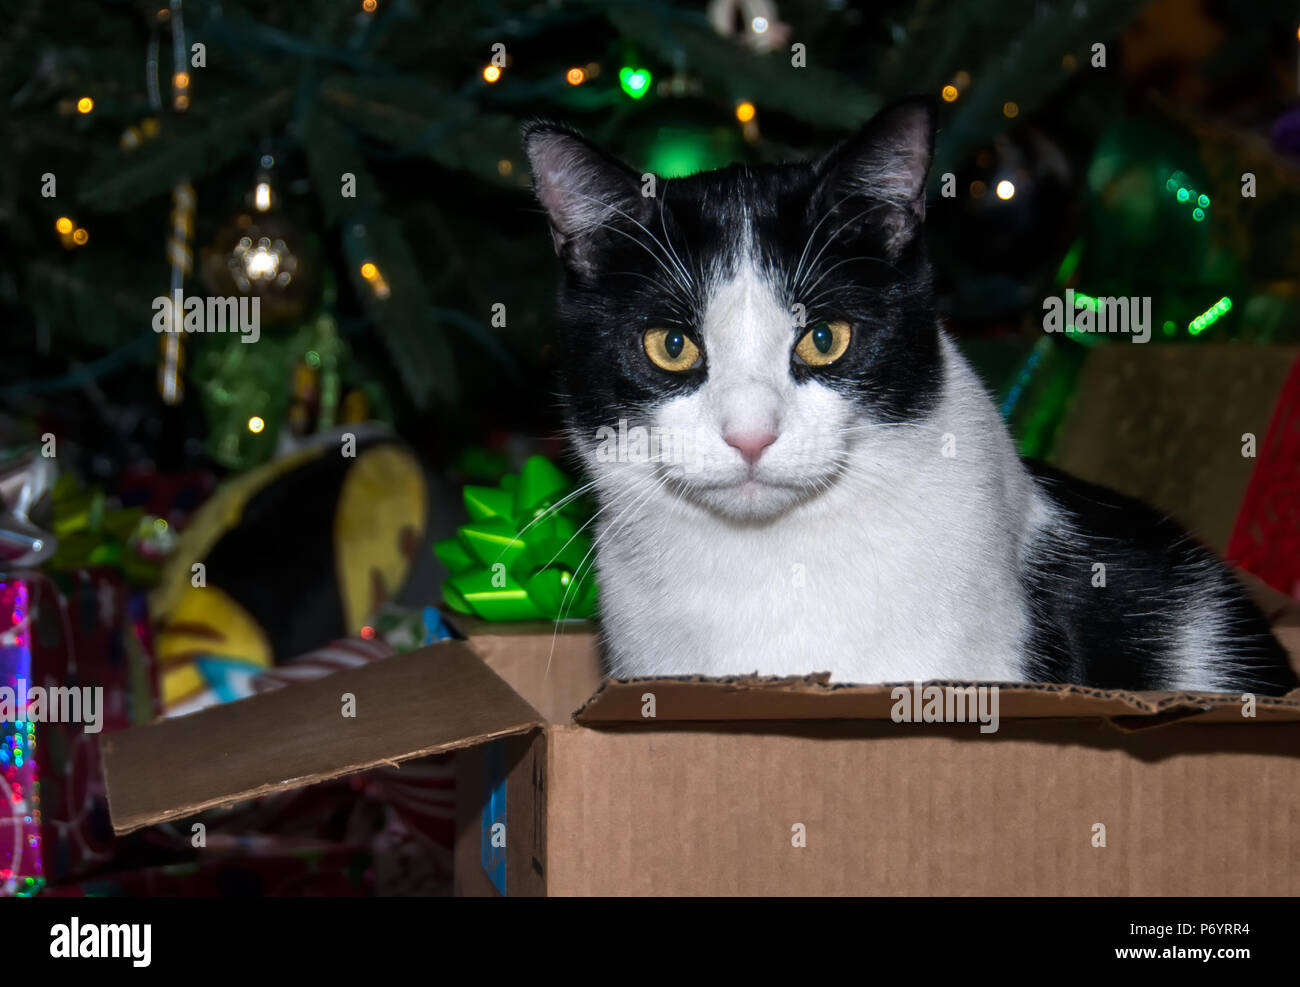 Black and white cat with gold eyes relaxing in a box at Christmas time. Stock Photo